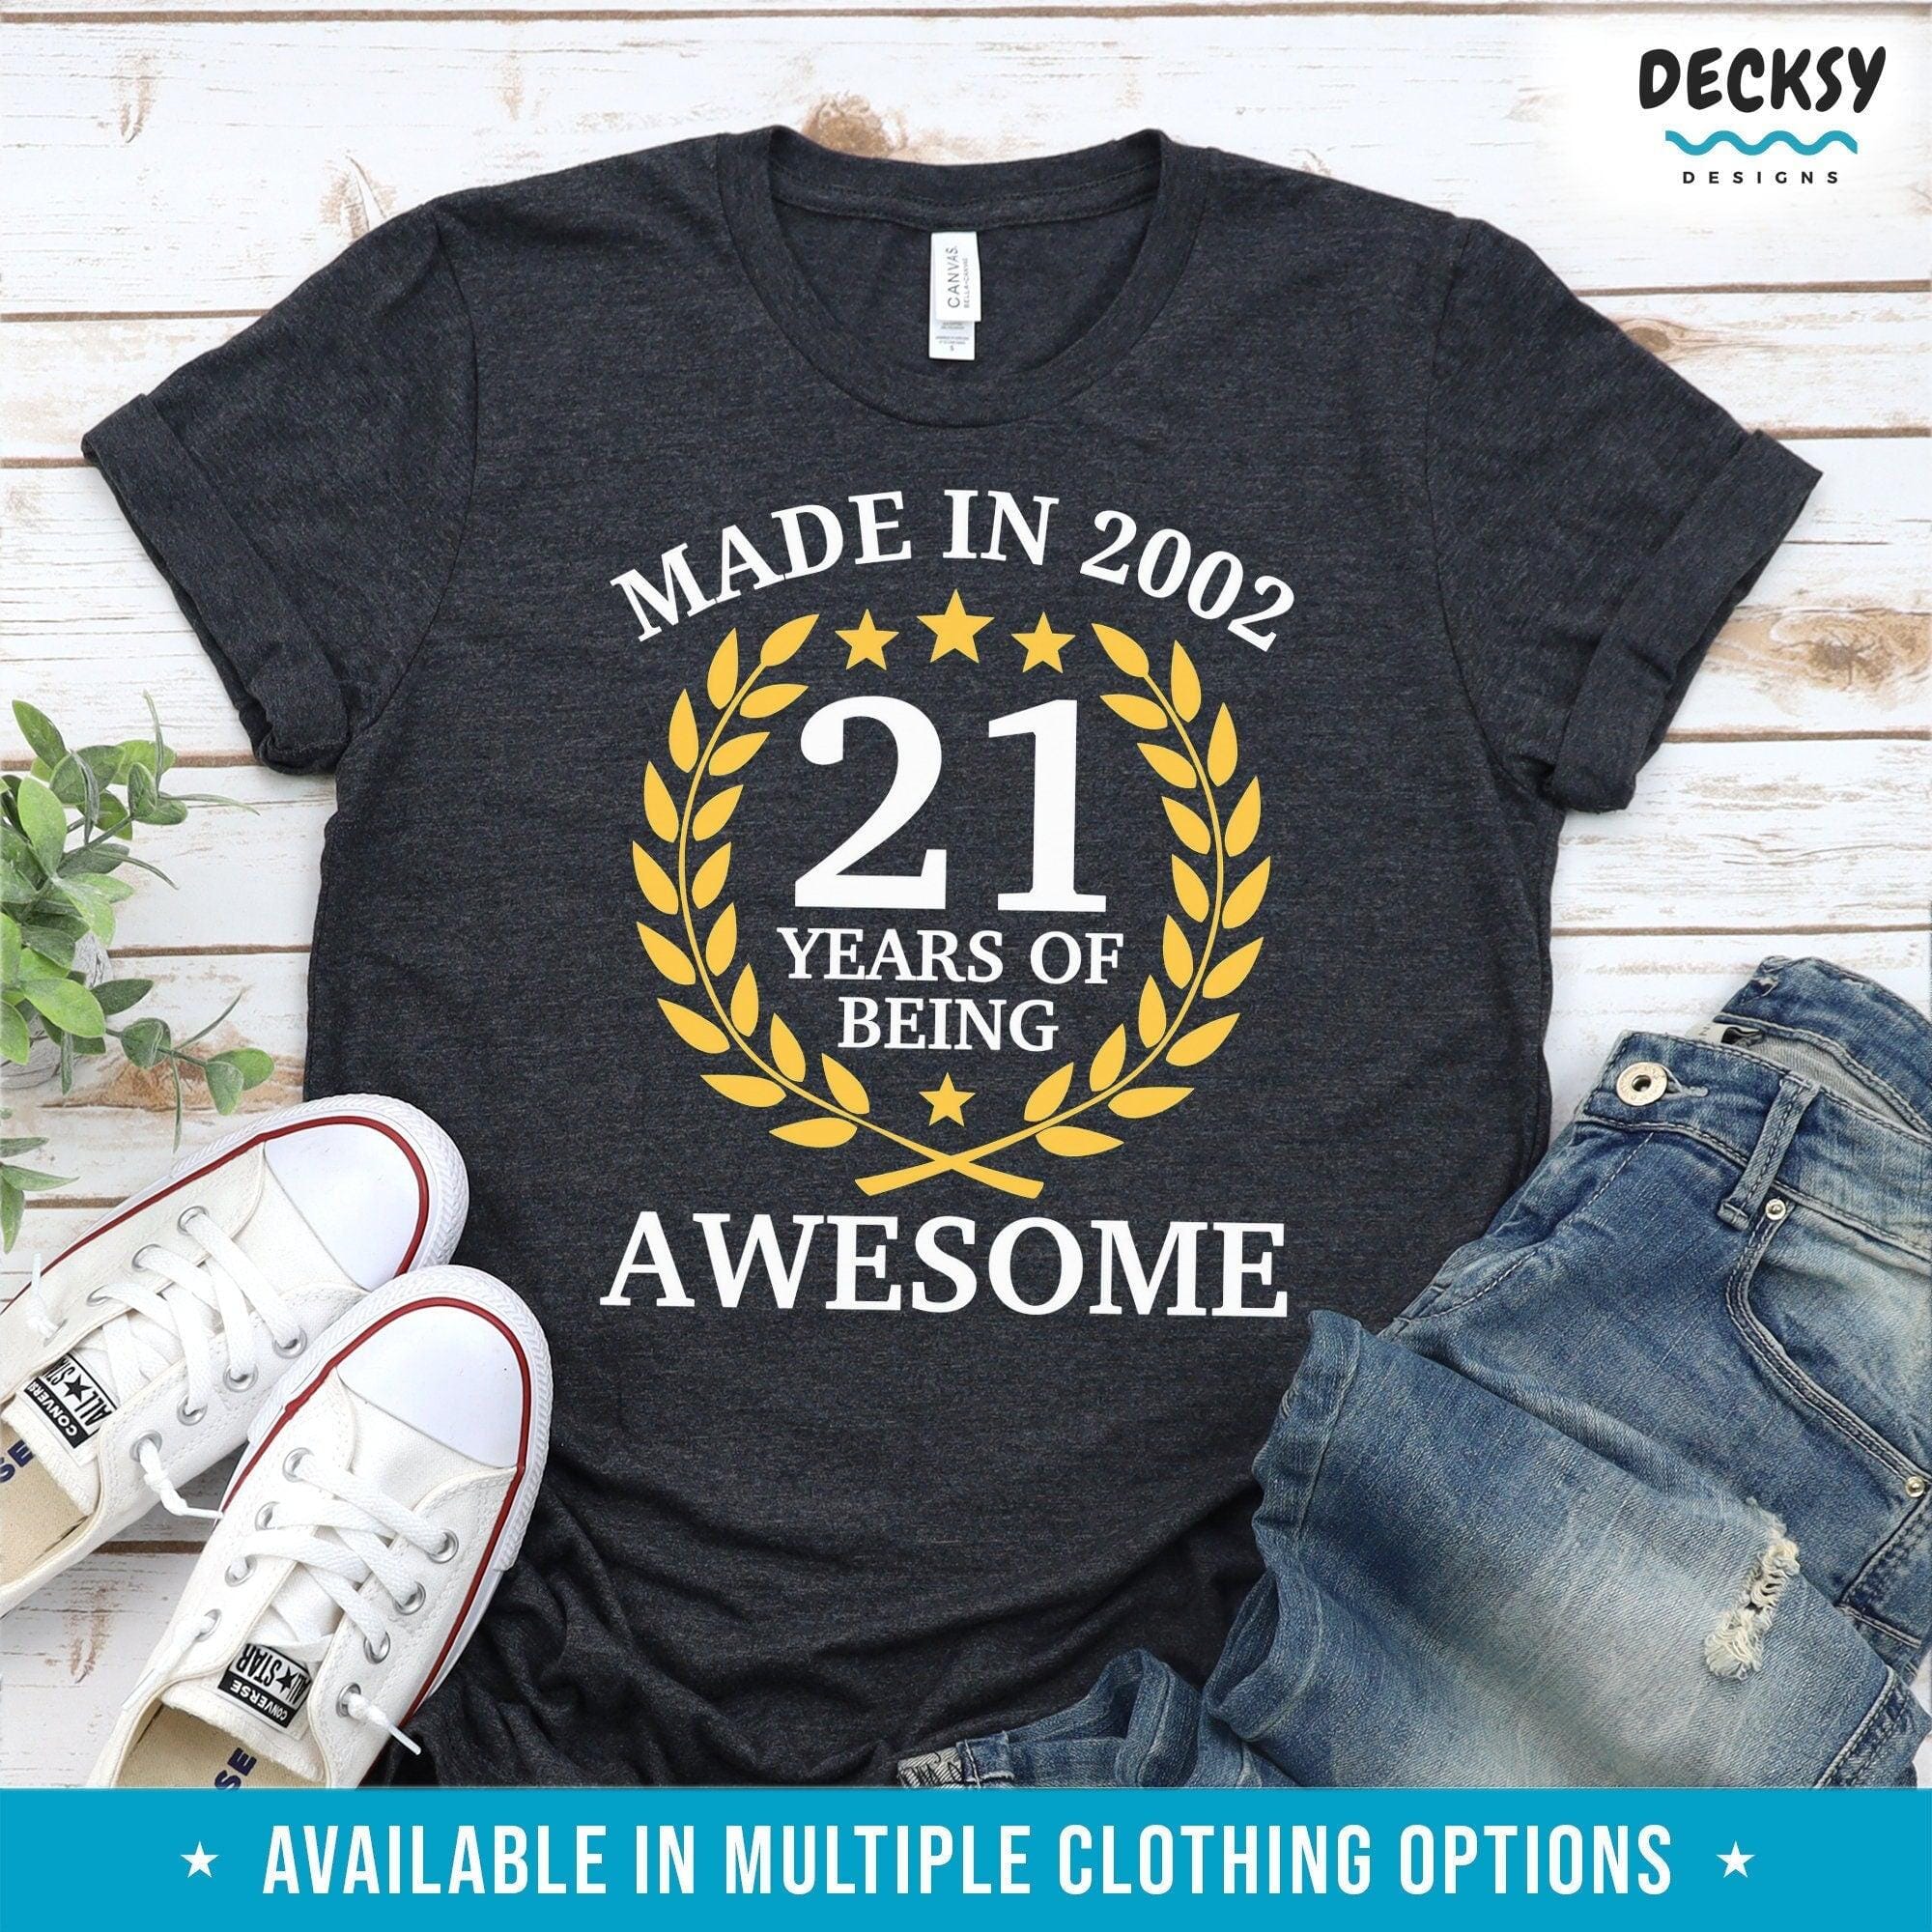 21st Birthday Tshirt, Born In 2002 Shirt, Happy Birthday Gift-Clothing:Gender-Neutral Adult Clothing:Tops & Tees:T-shirts:Graphic Tees-DecksyDesigns